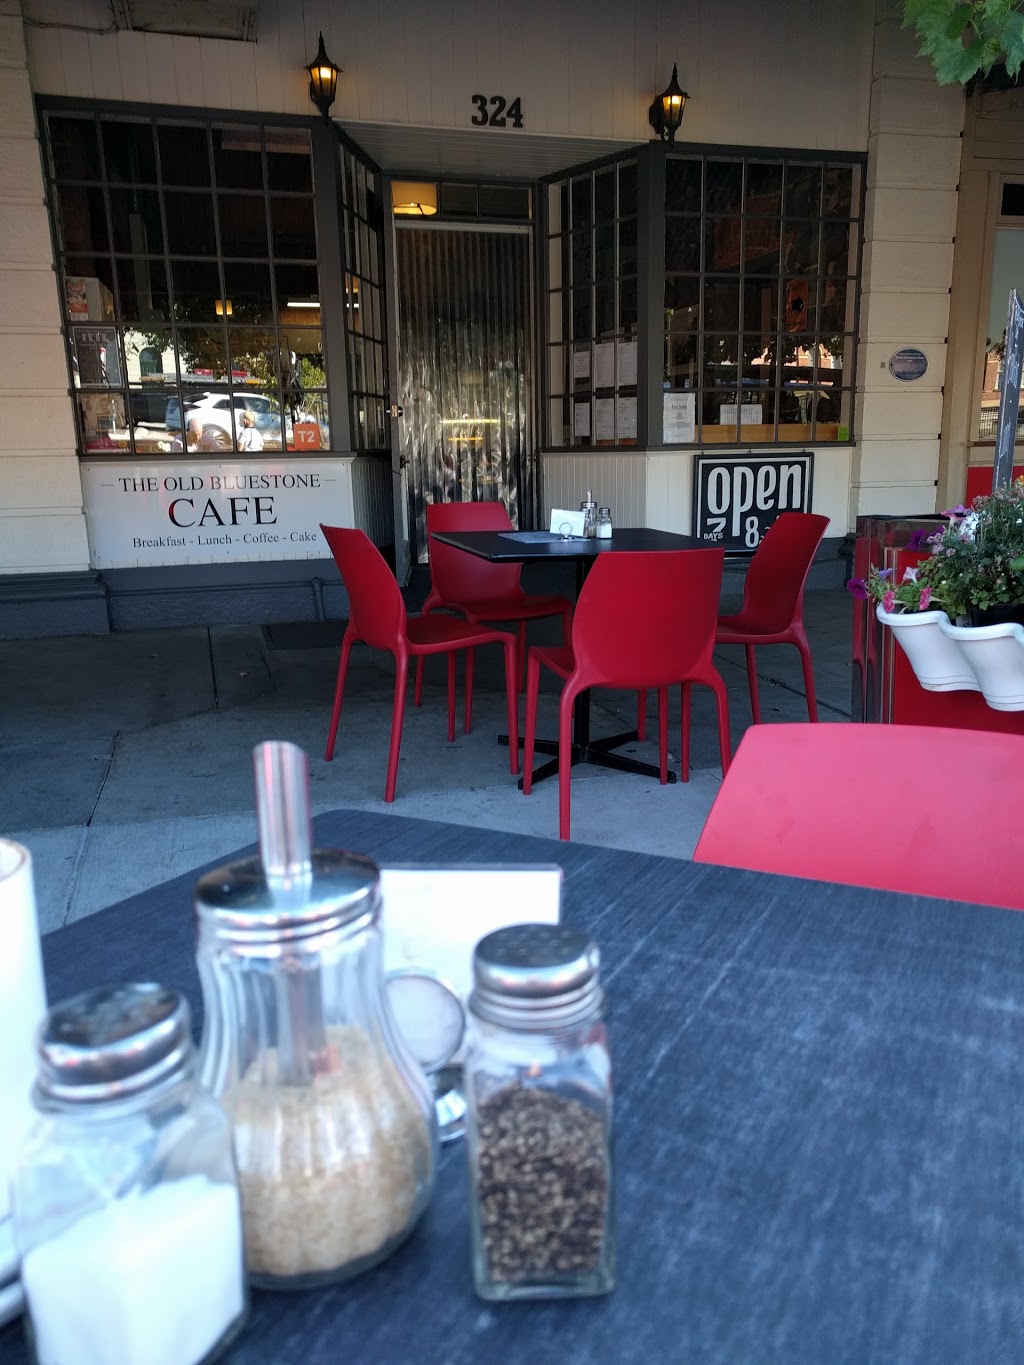 The Old Bluestone Cafe | cafe | 324 Learmonth St, Buninyong VIC 3357, Australia | 0353418166 OR +61 3 5341 8166